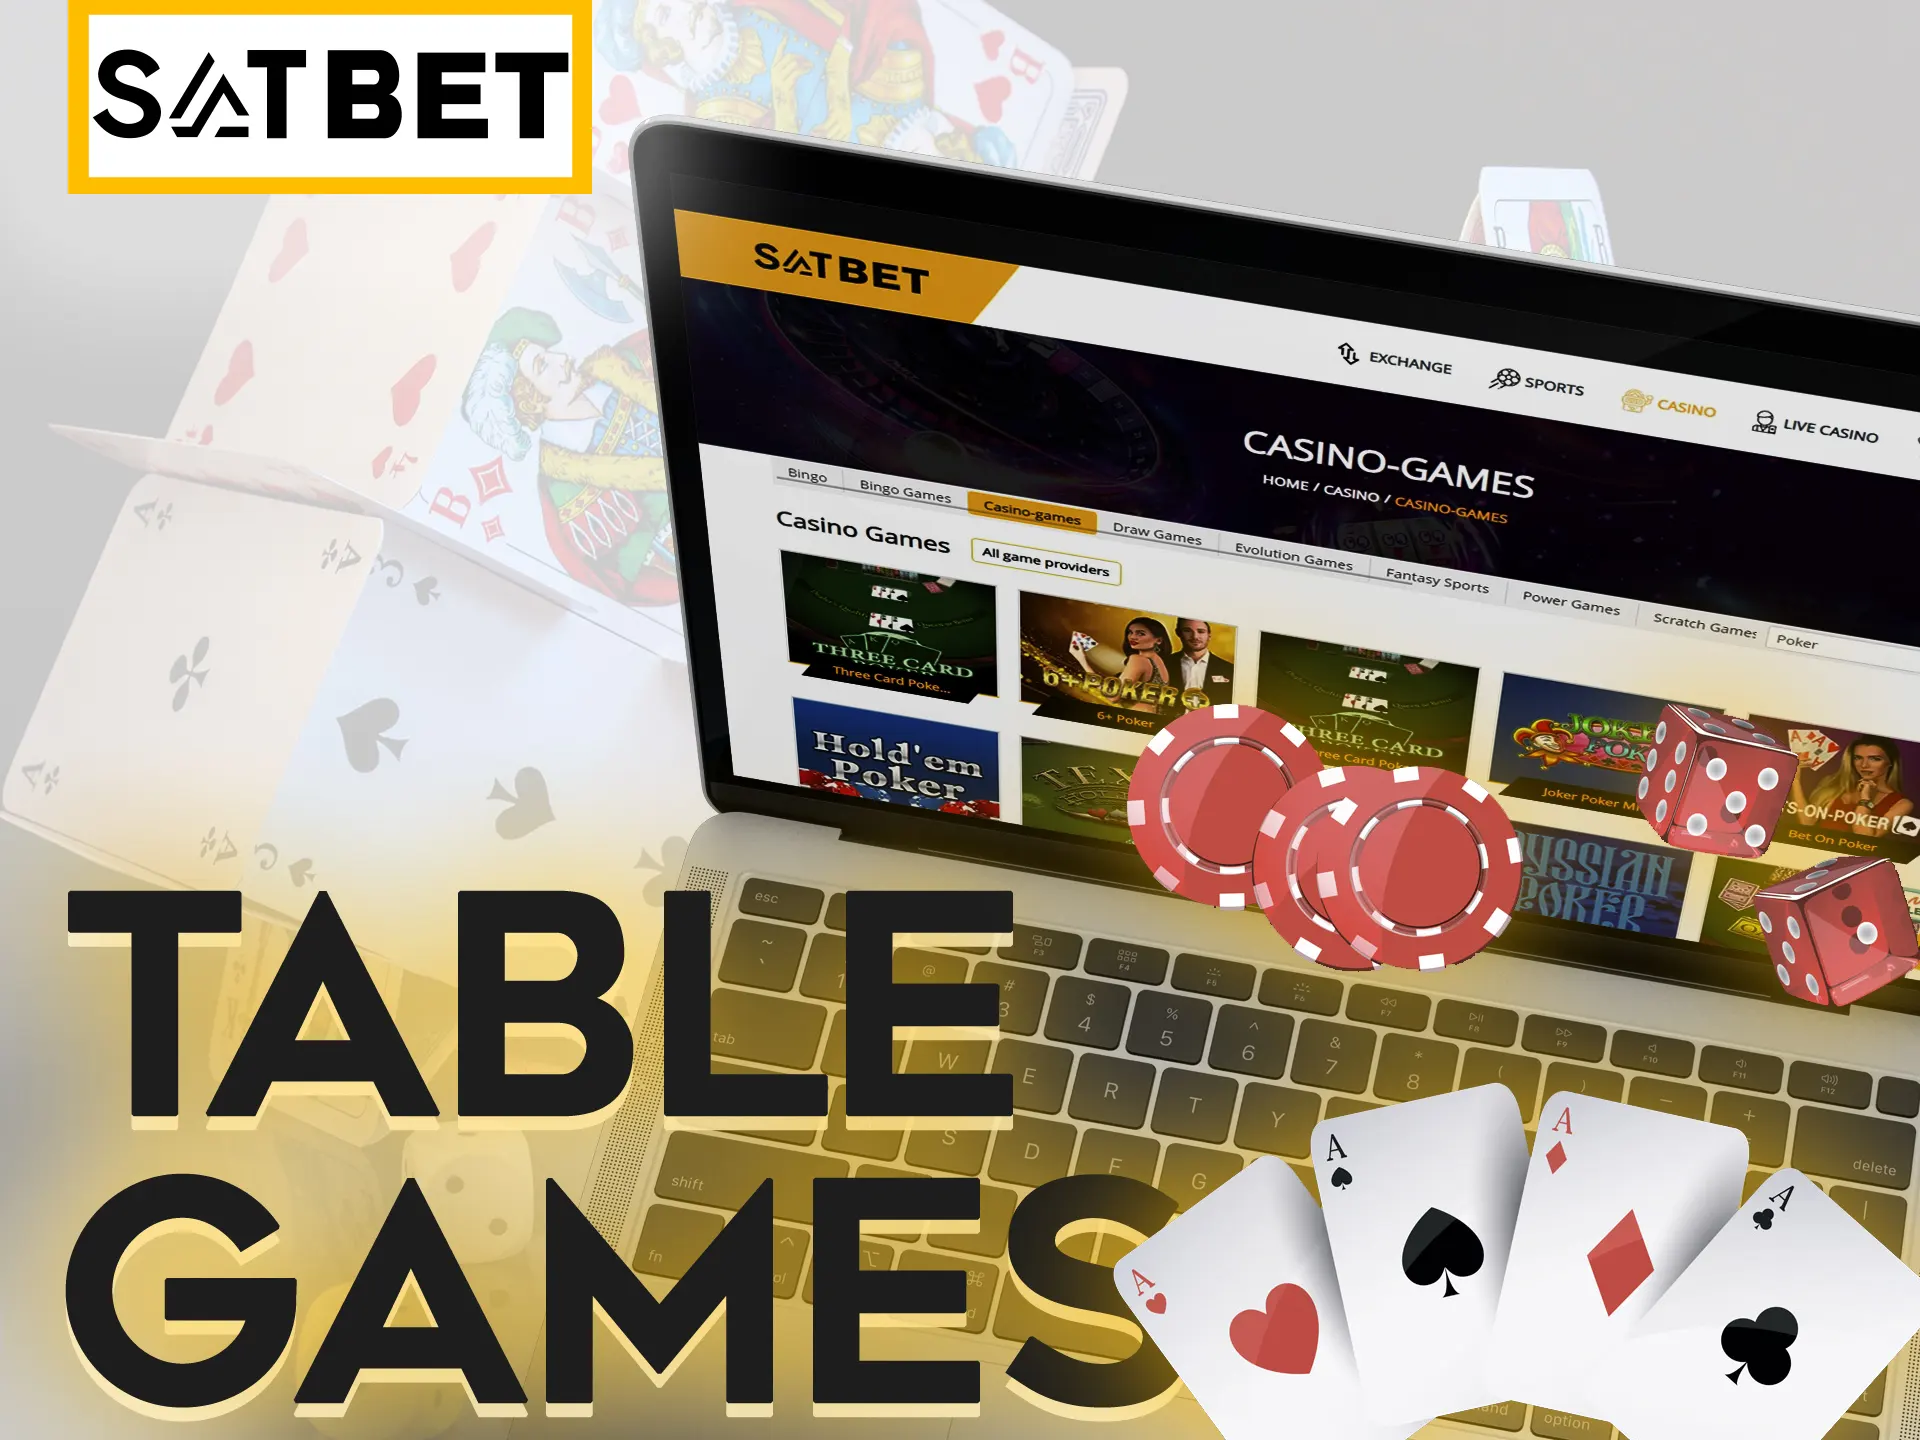 Play different table games at Satbet casino.